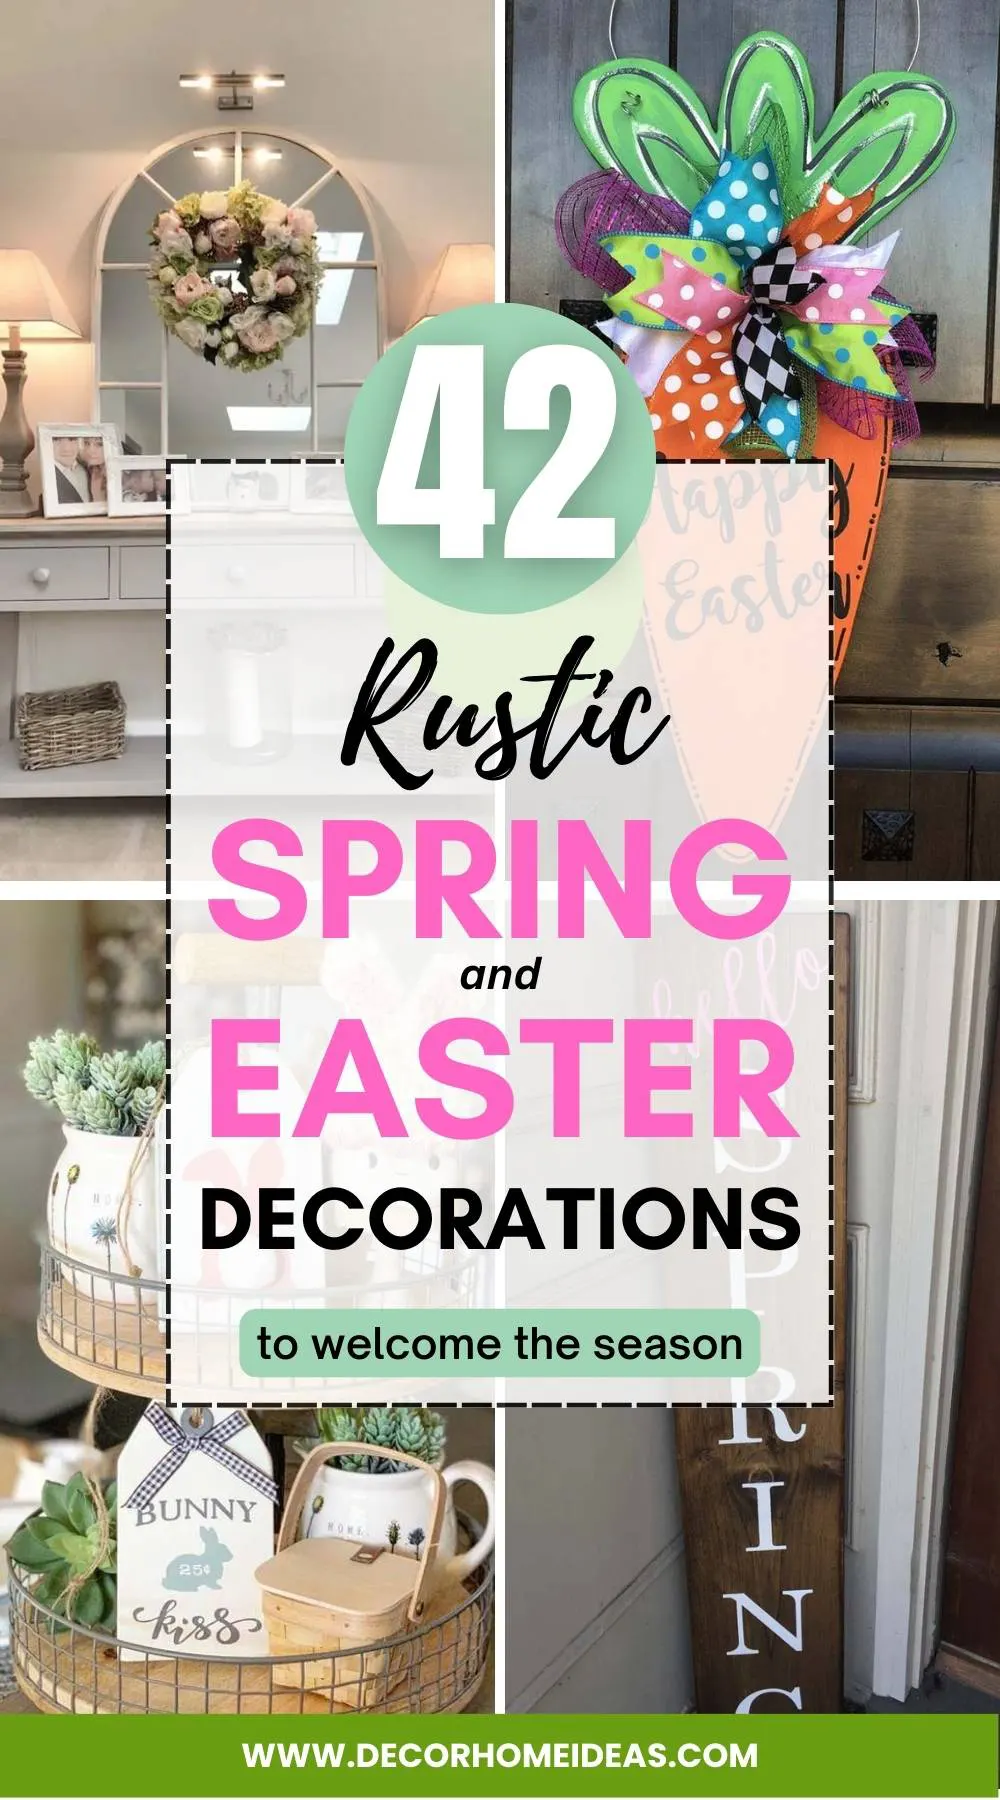 Rustic Easter and spring decorations are a perfect way to infuse your home with natural charm and cozy warmth. From burlap banners to mason jar vases, these decor ideas combine vintage elements with fresh blooms and pastel colors to create a welcoming and inviting atmosphere for the season.